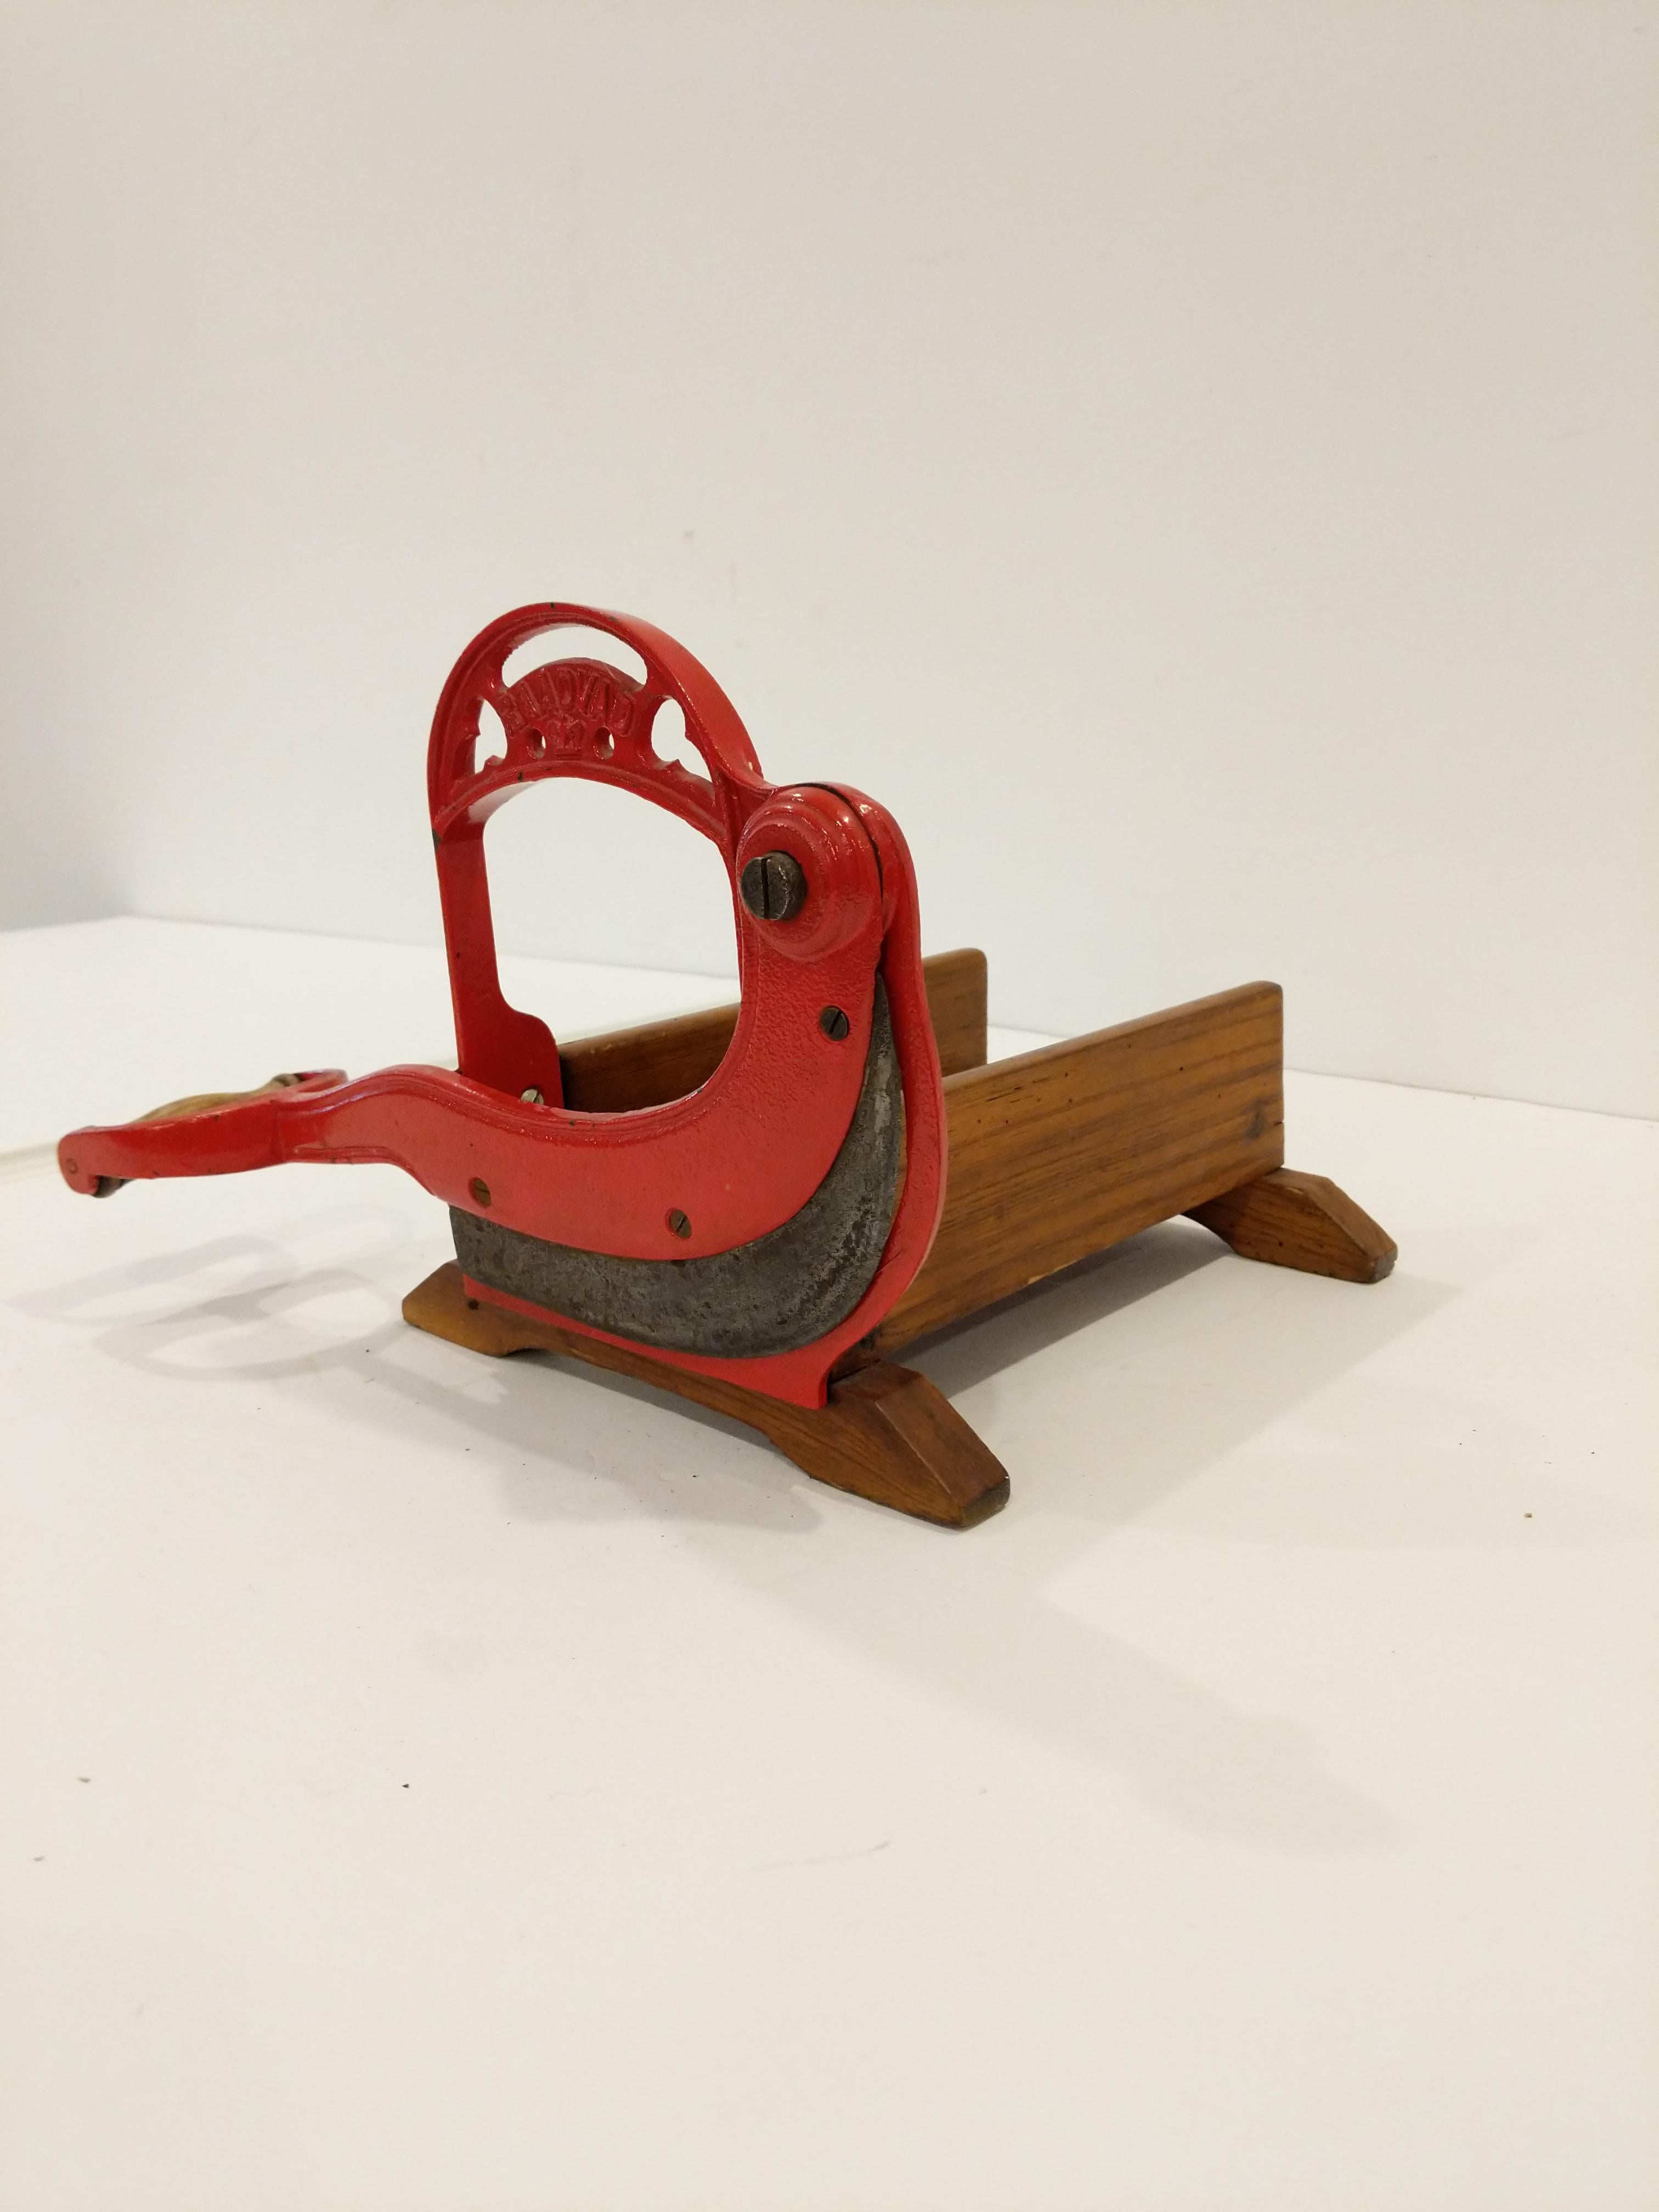 Antique Raadvad Bread Slicer In Good Condition For Sale In Gardiner, NY